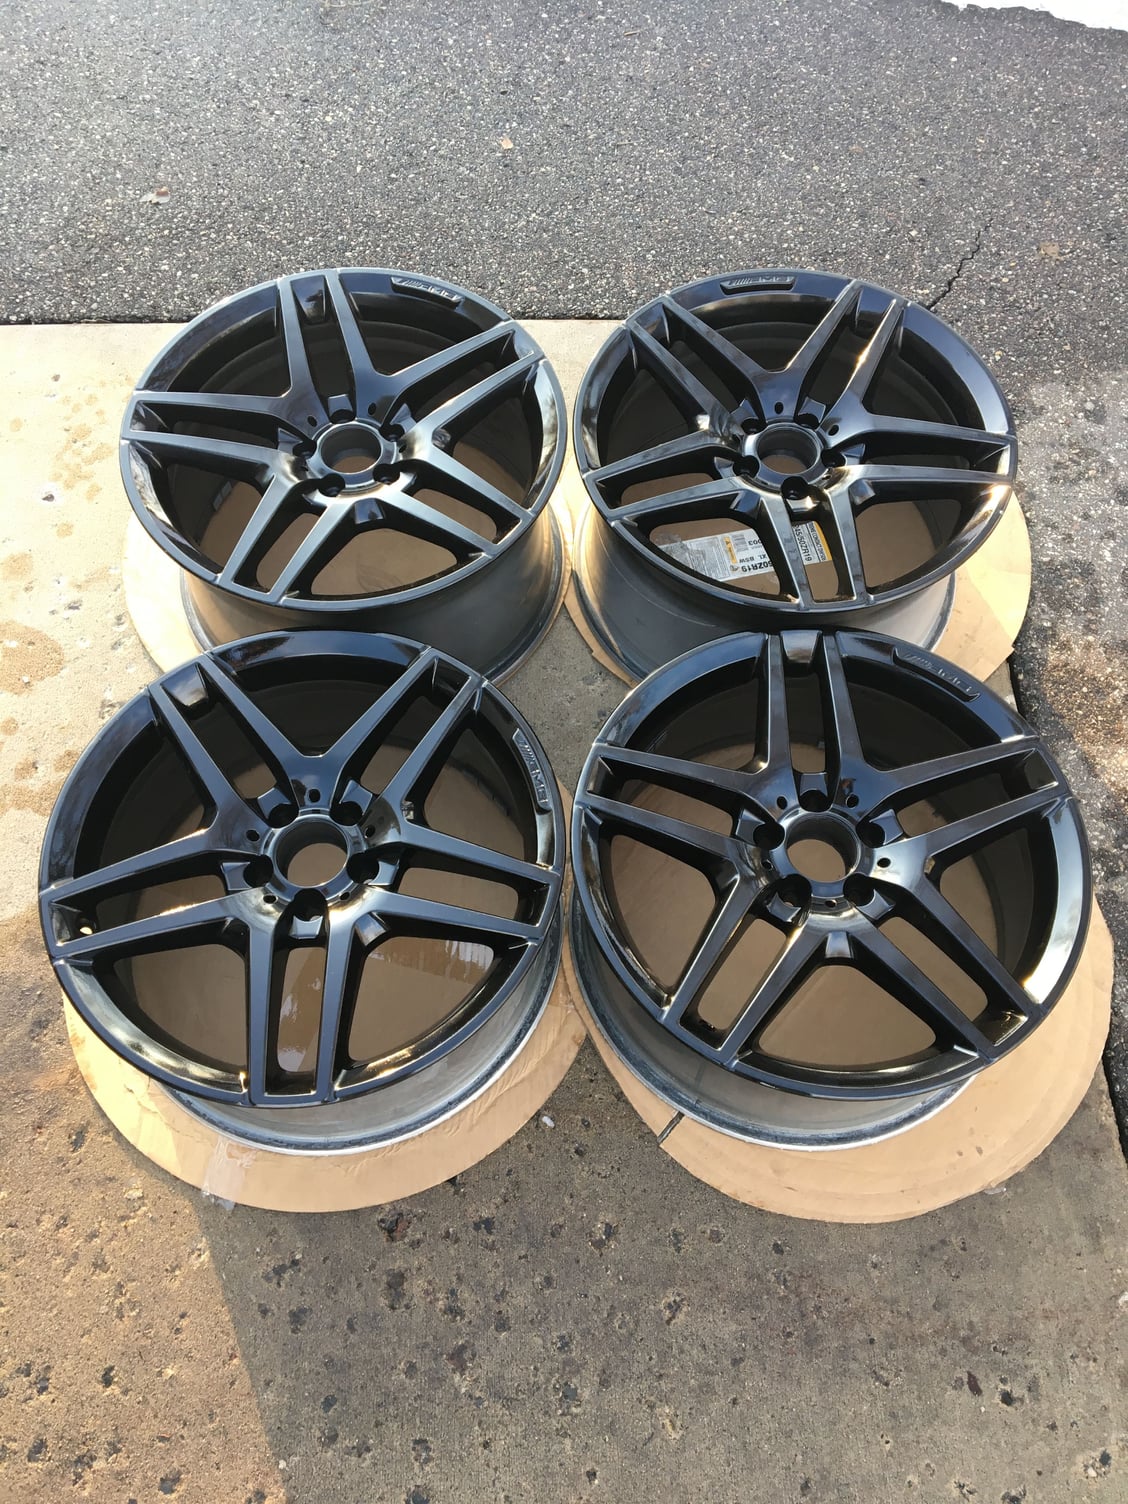 Wheels and Tires/Axles - 19" OEM Mercedes AMG Wheels - Like NEW - Gloss Black - W222 - Used - 2000 to 2016 Mercedes-Benz S550 - Minneapolis, MN 55447, United States